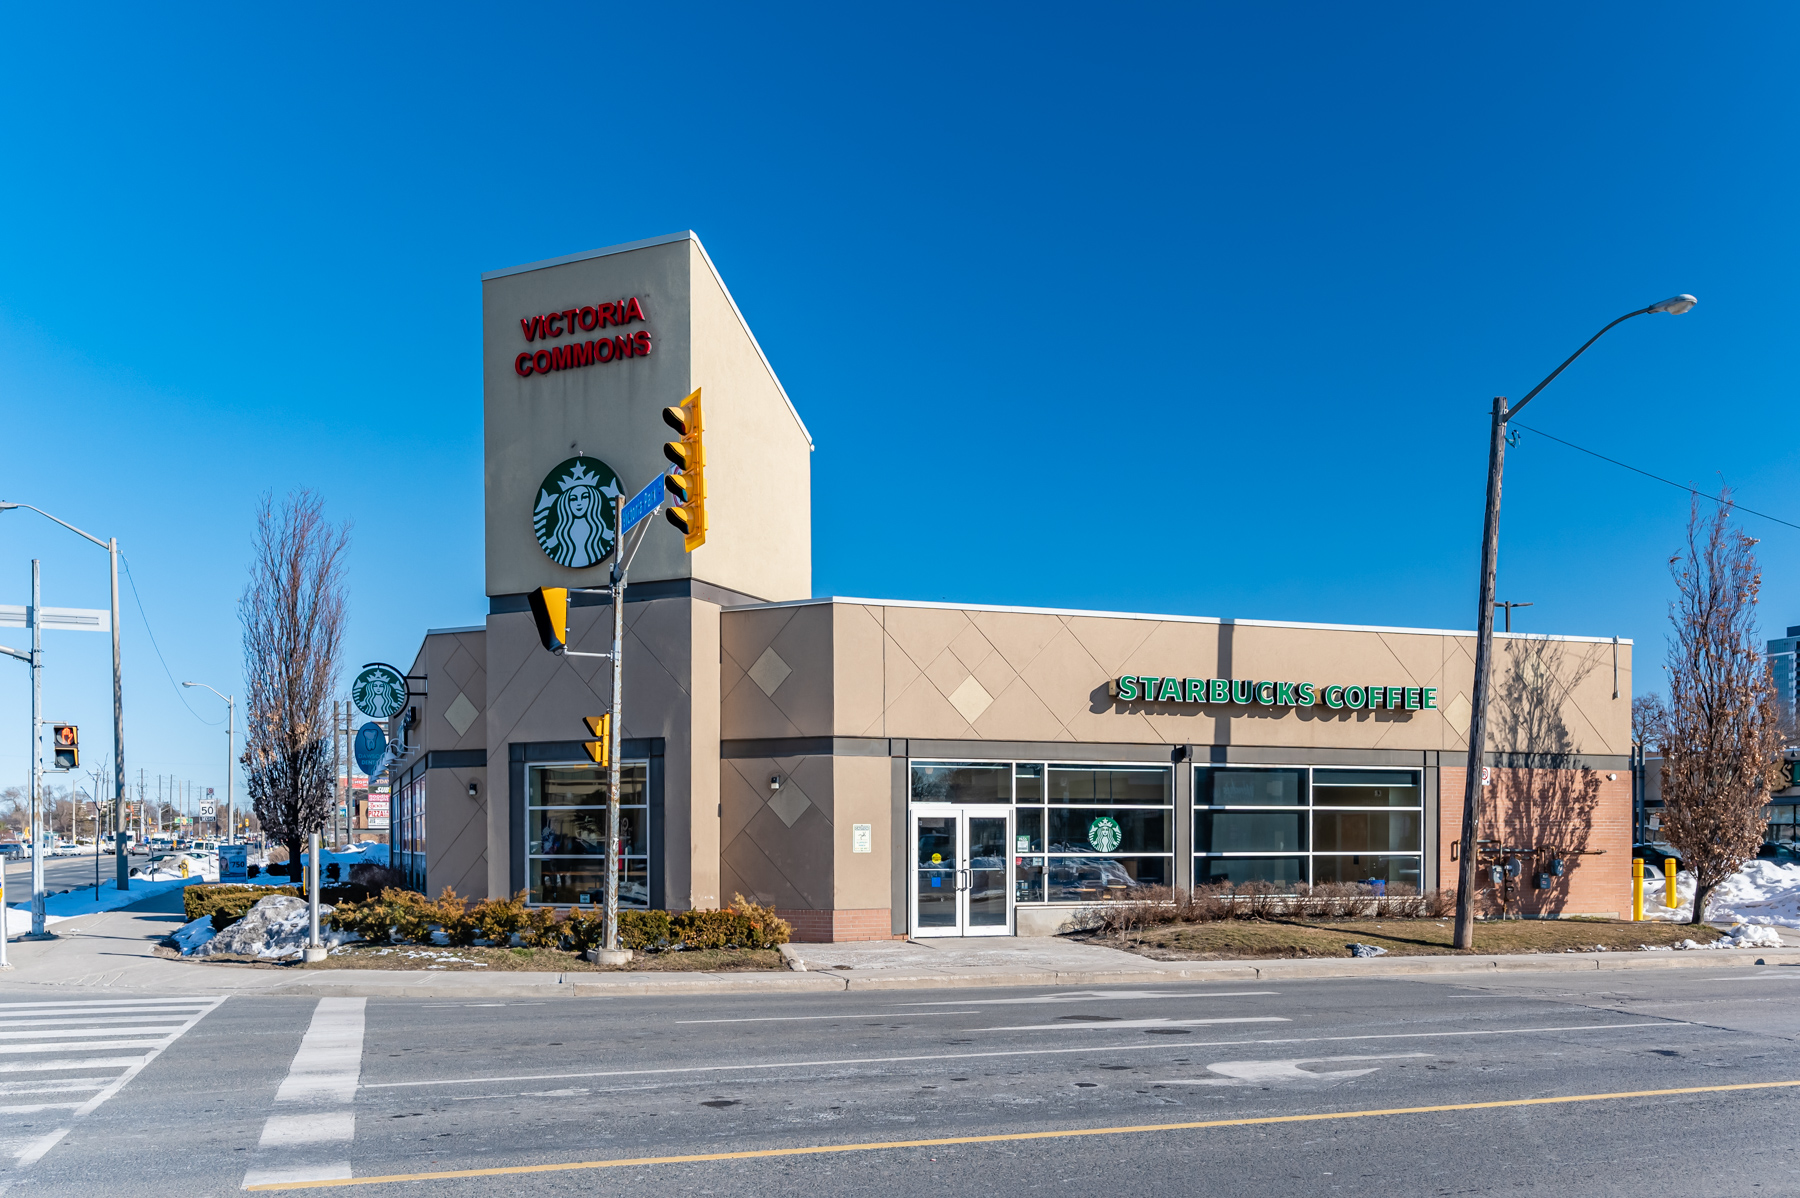 Starbucks Coffee store at Victoria Commons mall, as seen from across street.